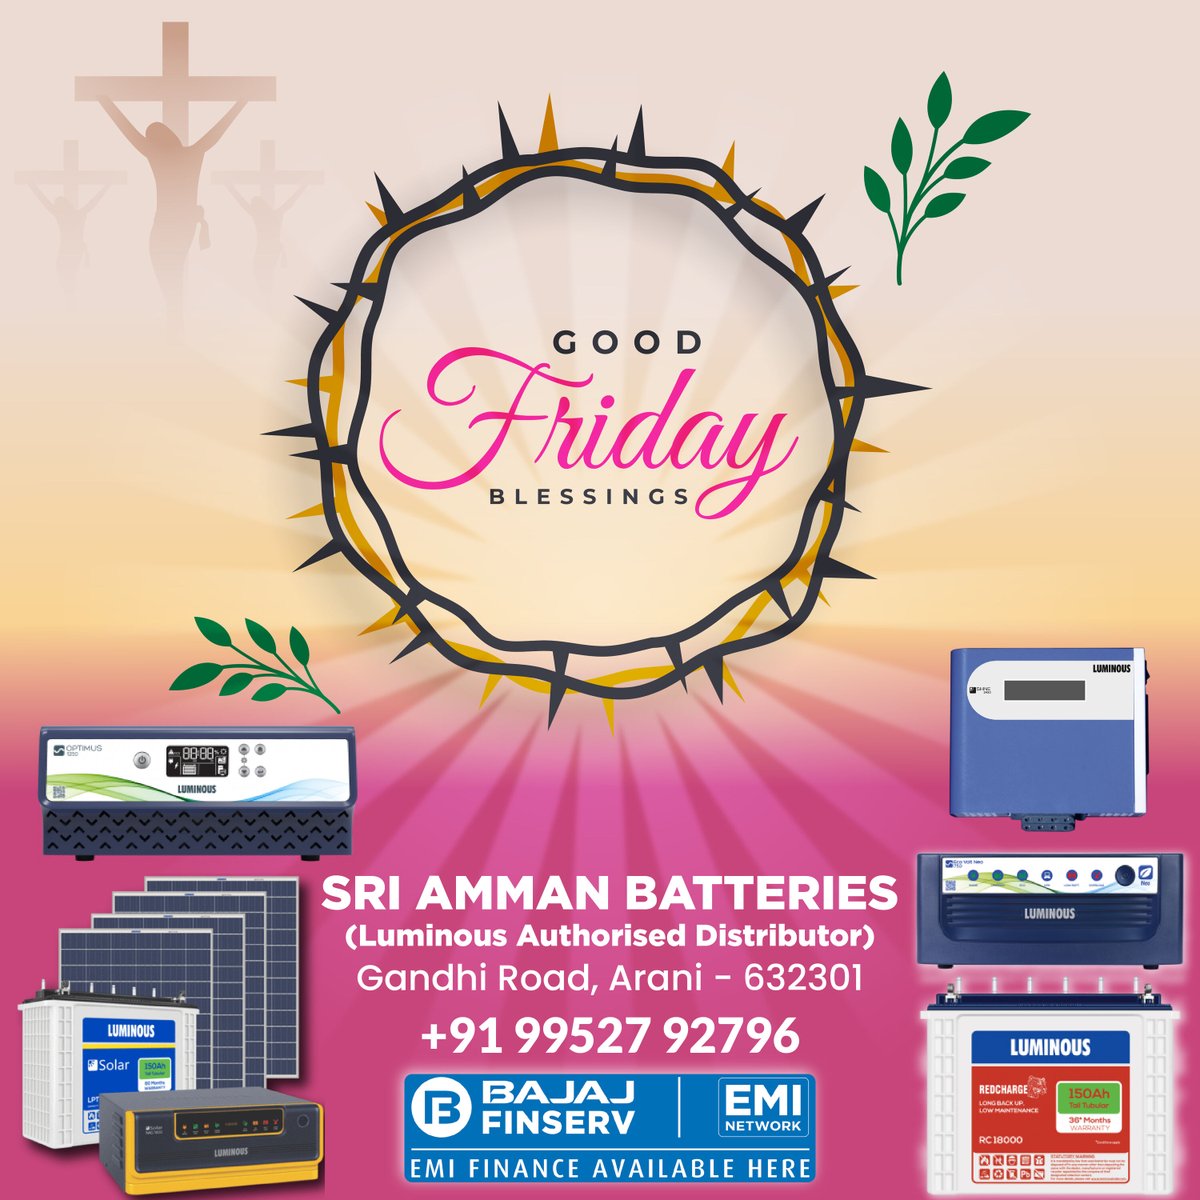 Wish you a blessed Good Friday.
#goodfriday #Battery #battery #batteryreplacement #batterypower #inverterbattery #invertersystem #solarinverter #inverterbatteries #inverter #solarsystem #solarpanels #solarpower #SolarPower #solar #solarinstallation